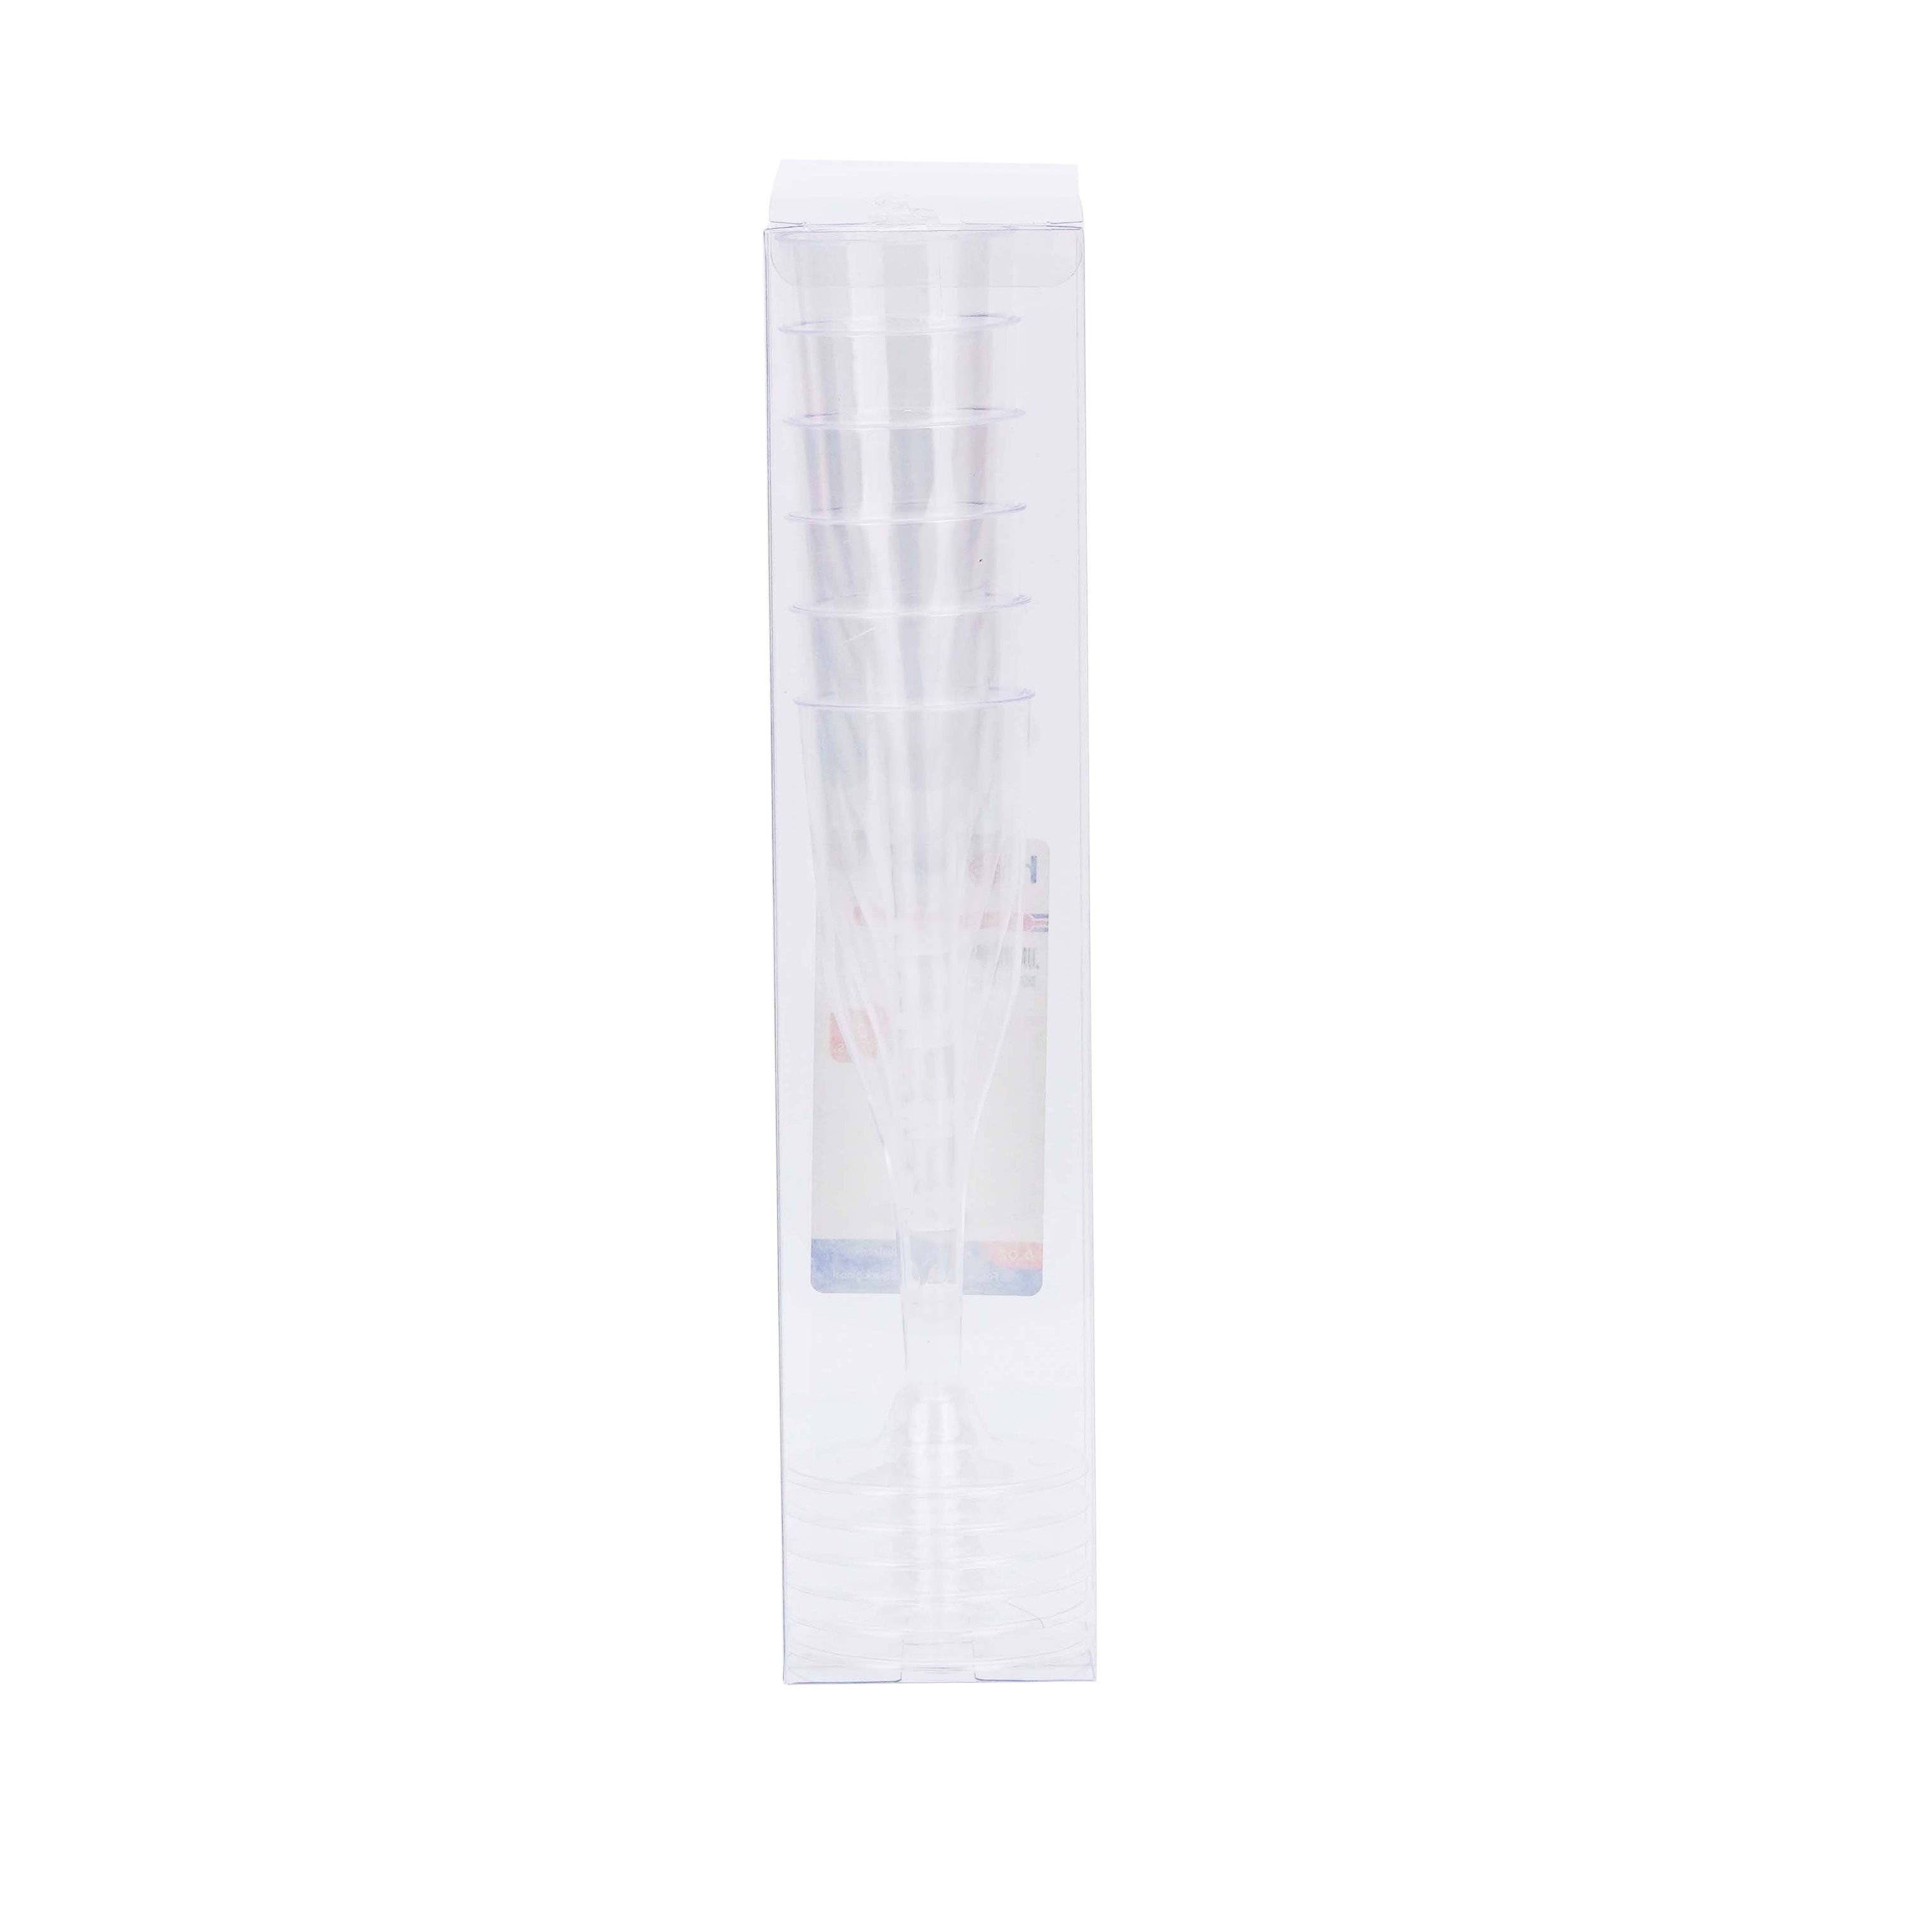 6 Oz Champagne clear plastic glass 6 Pieces - Hotpack Global